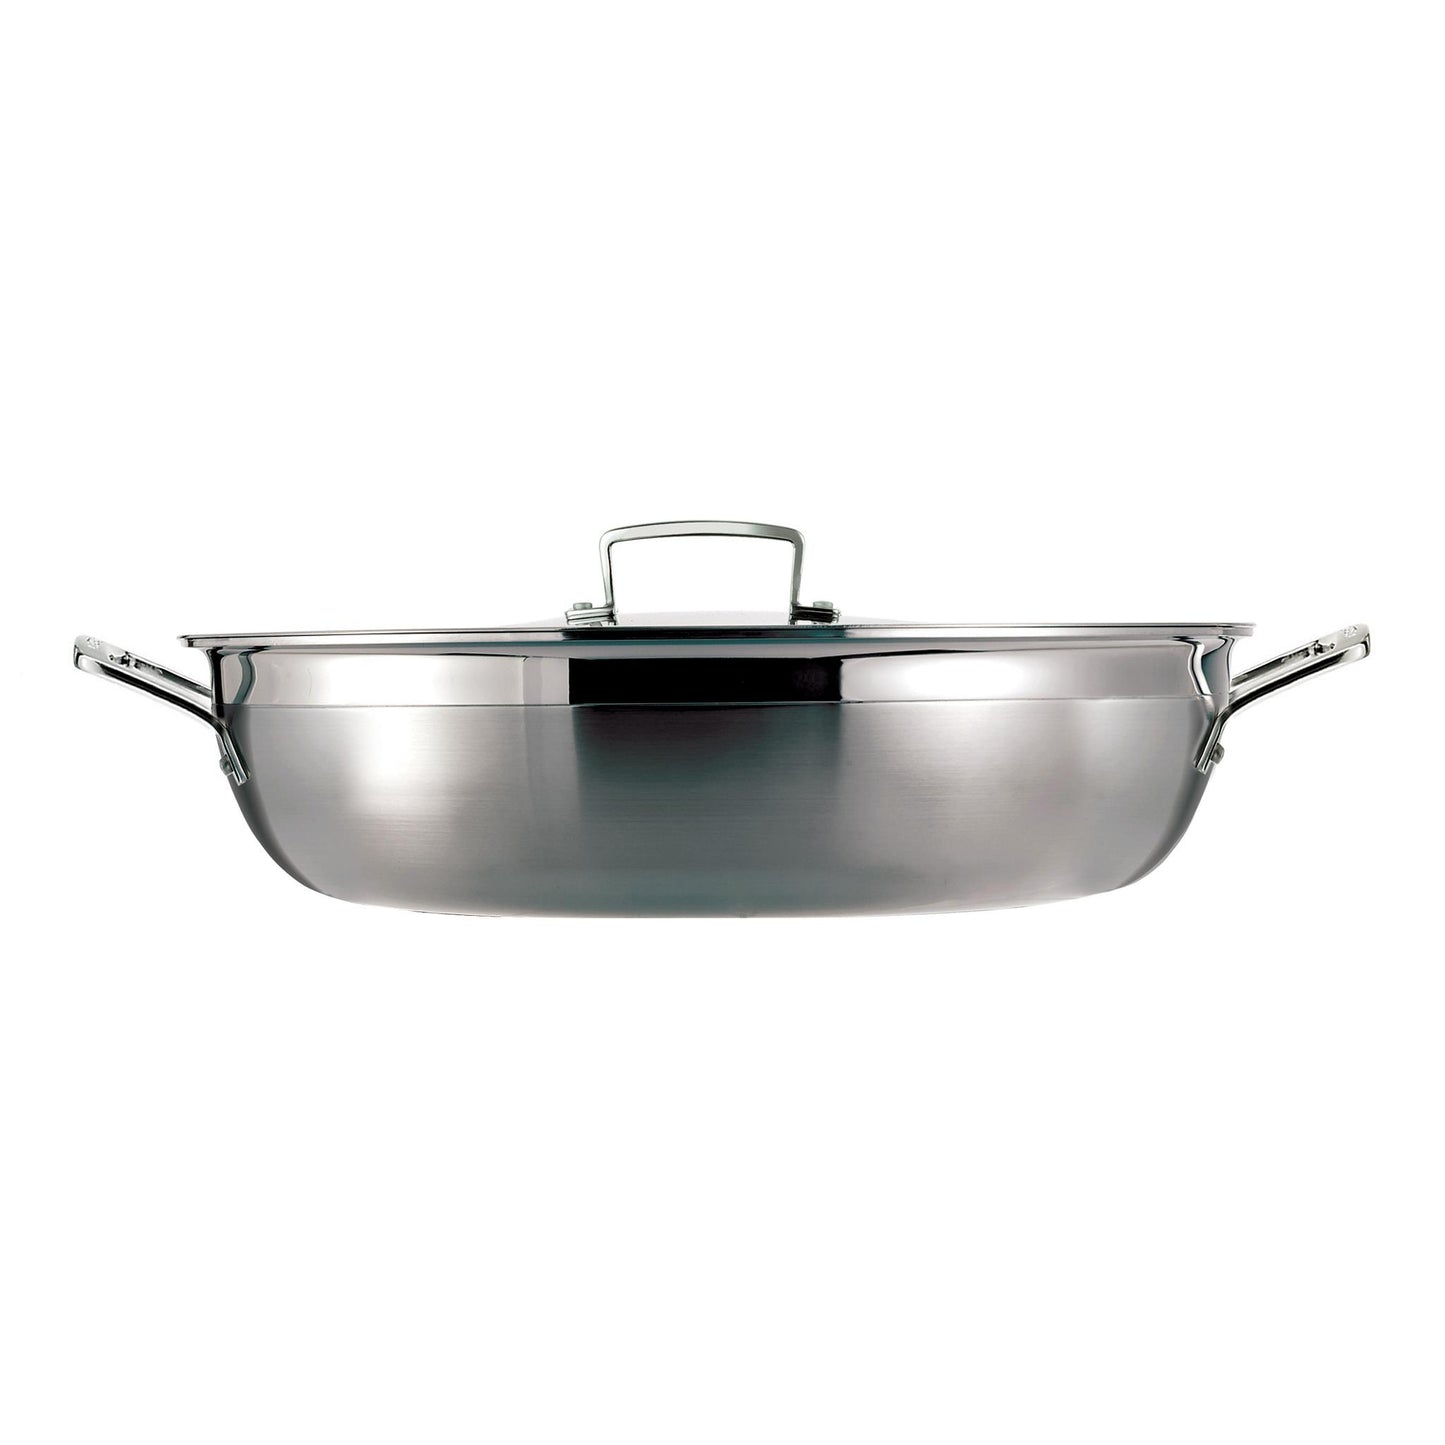 A side view of the stainless steel casserole pan